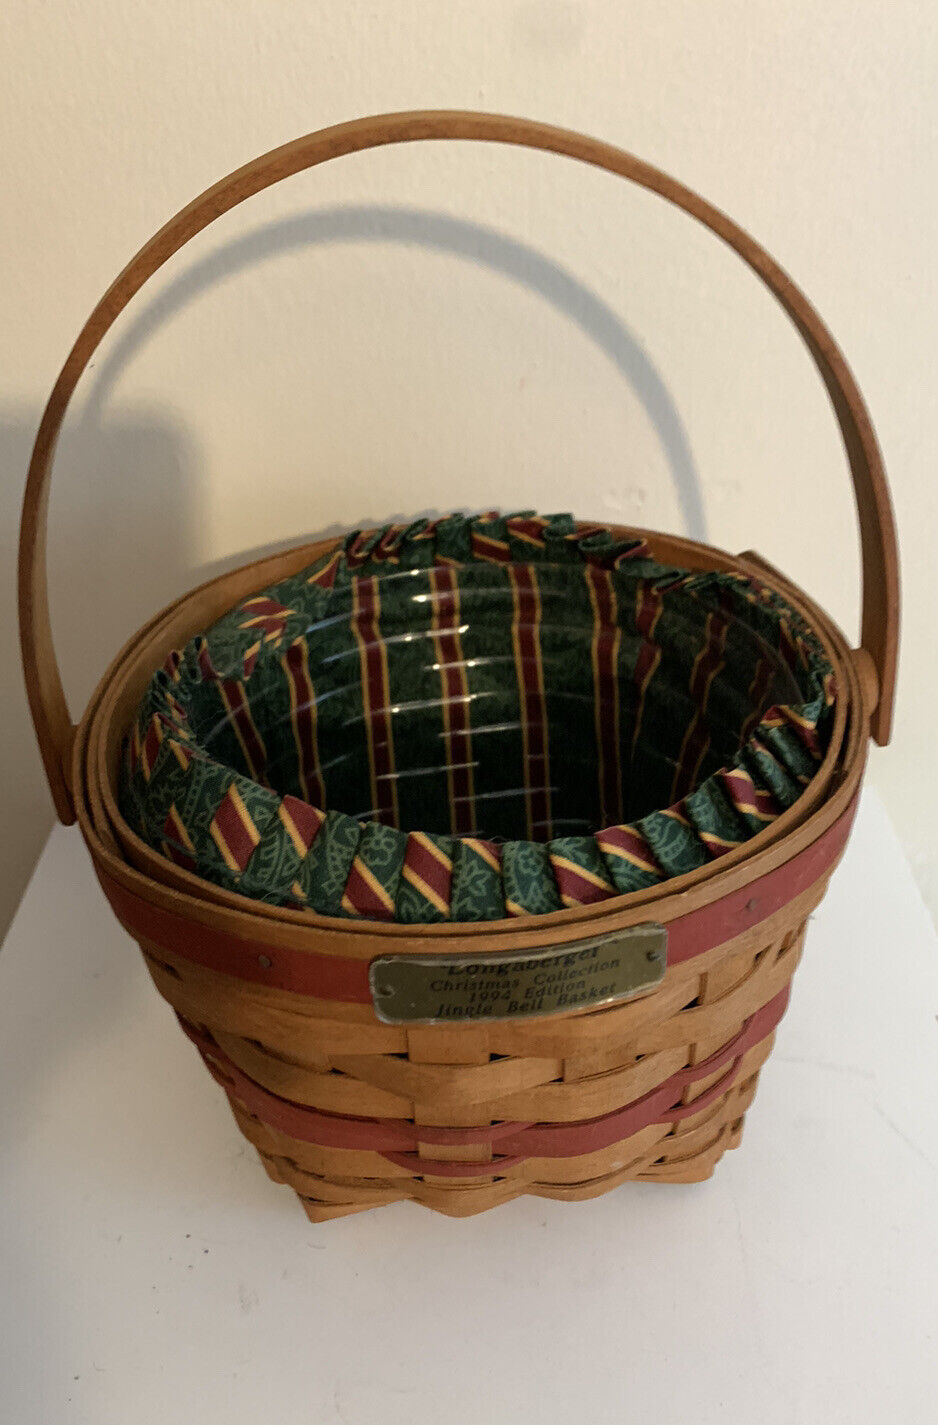 Longaberger Christmas Collection 1994 Edition Jingle Bell Basket With liner